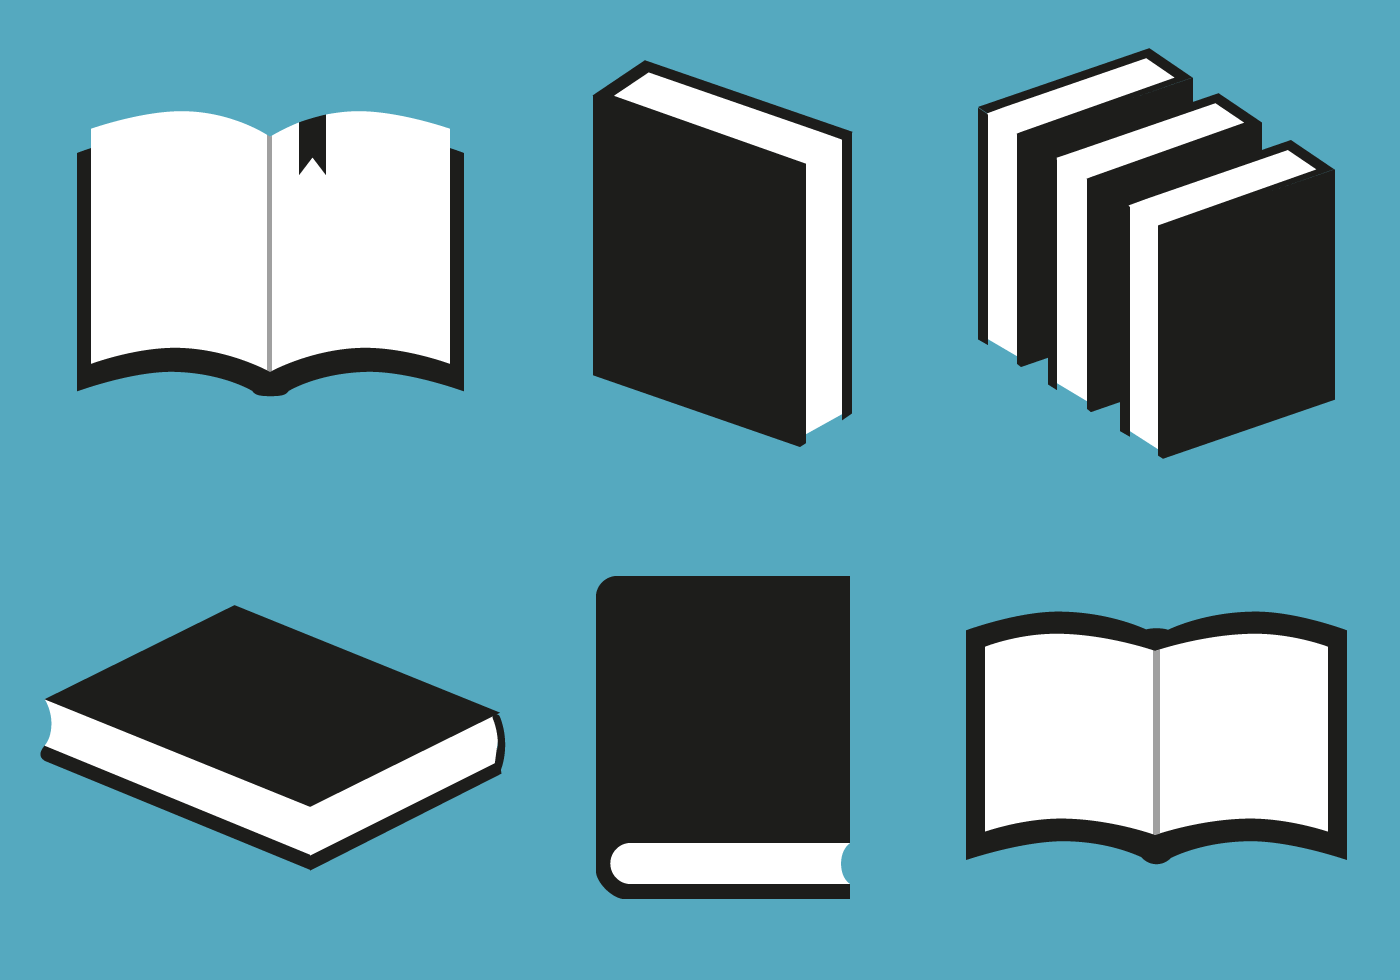 Free Books Vector Download Free Vector Art, Stock